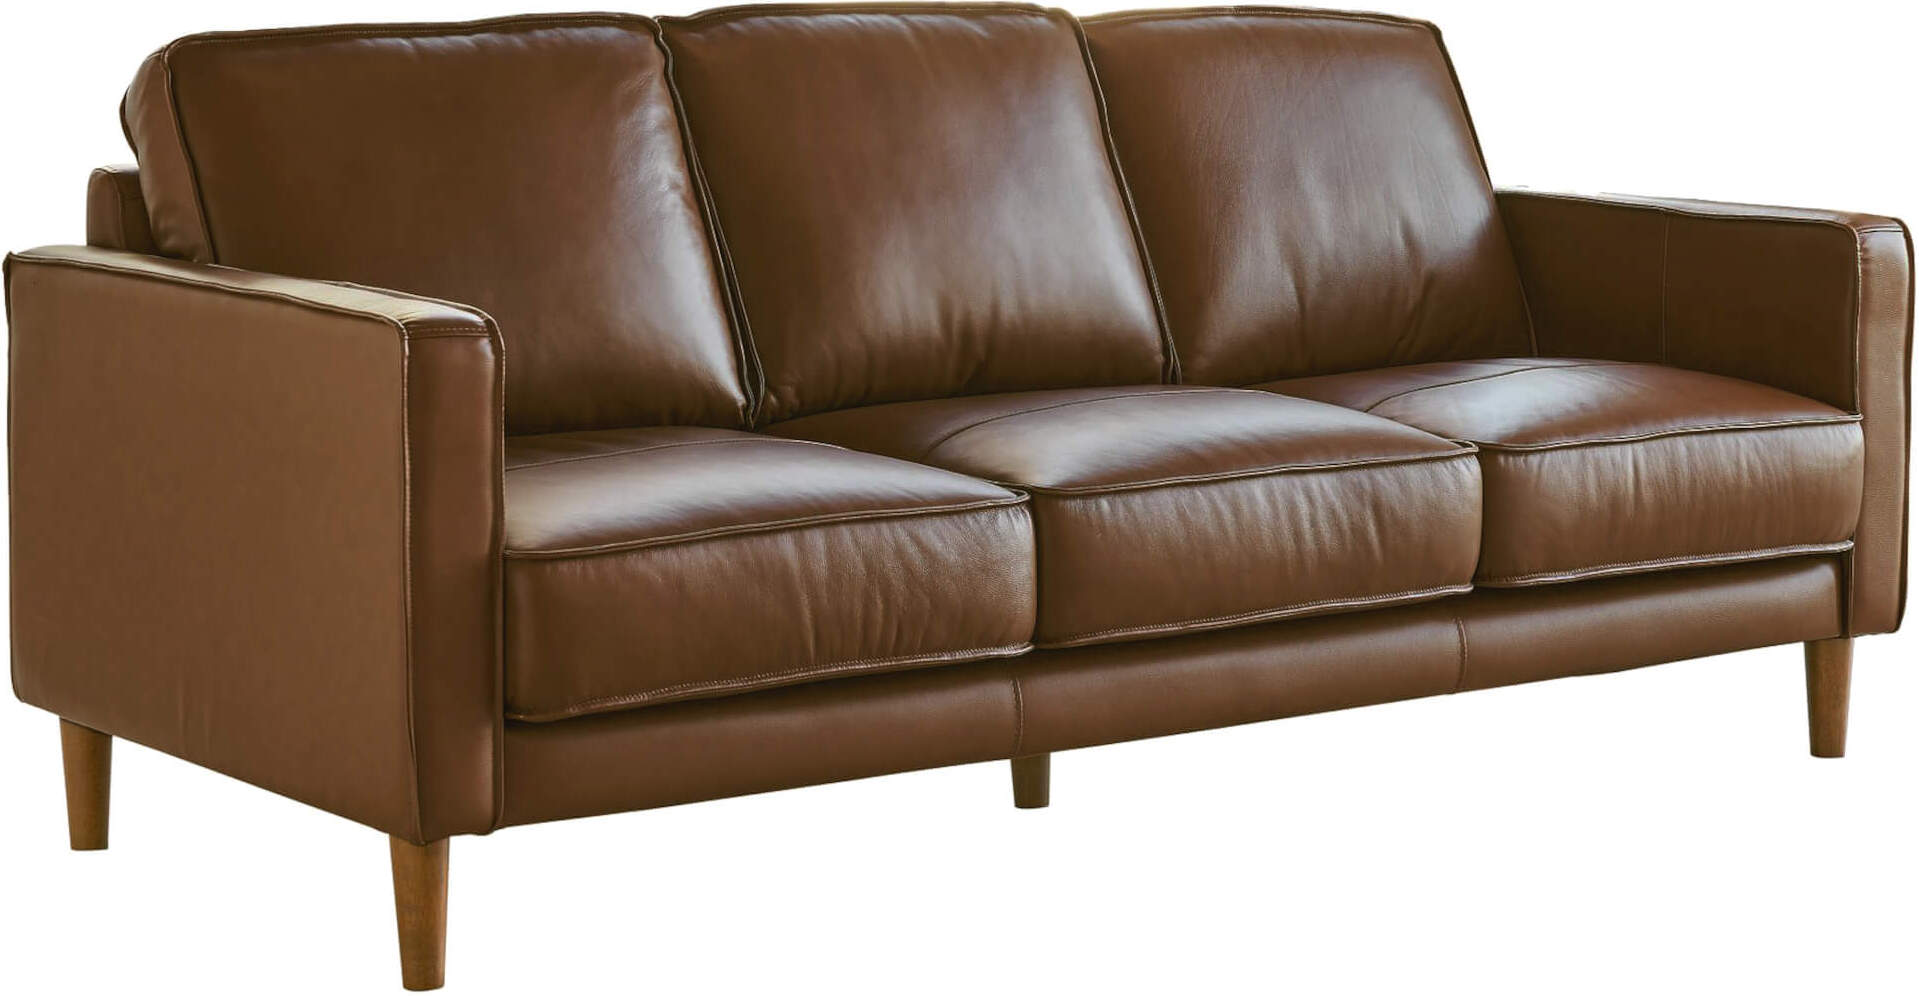 Sunset Trading Prelude 79 Inch Wide Top Grain Leather Sofa Chestnut Brown Mid Century Modern 3 Seater Couch 1stopbedrooms